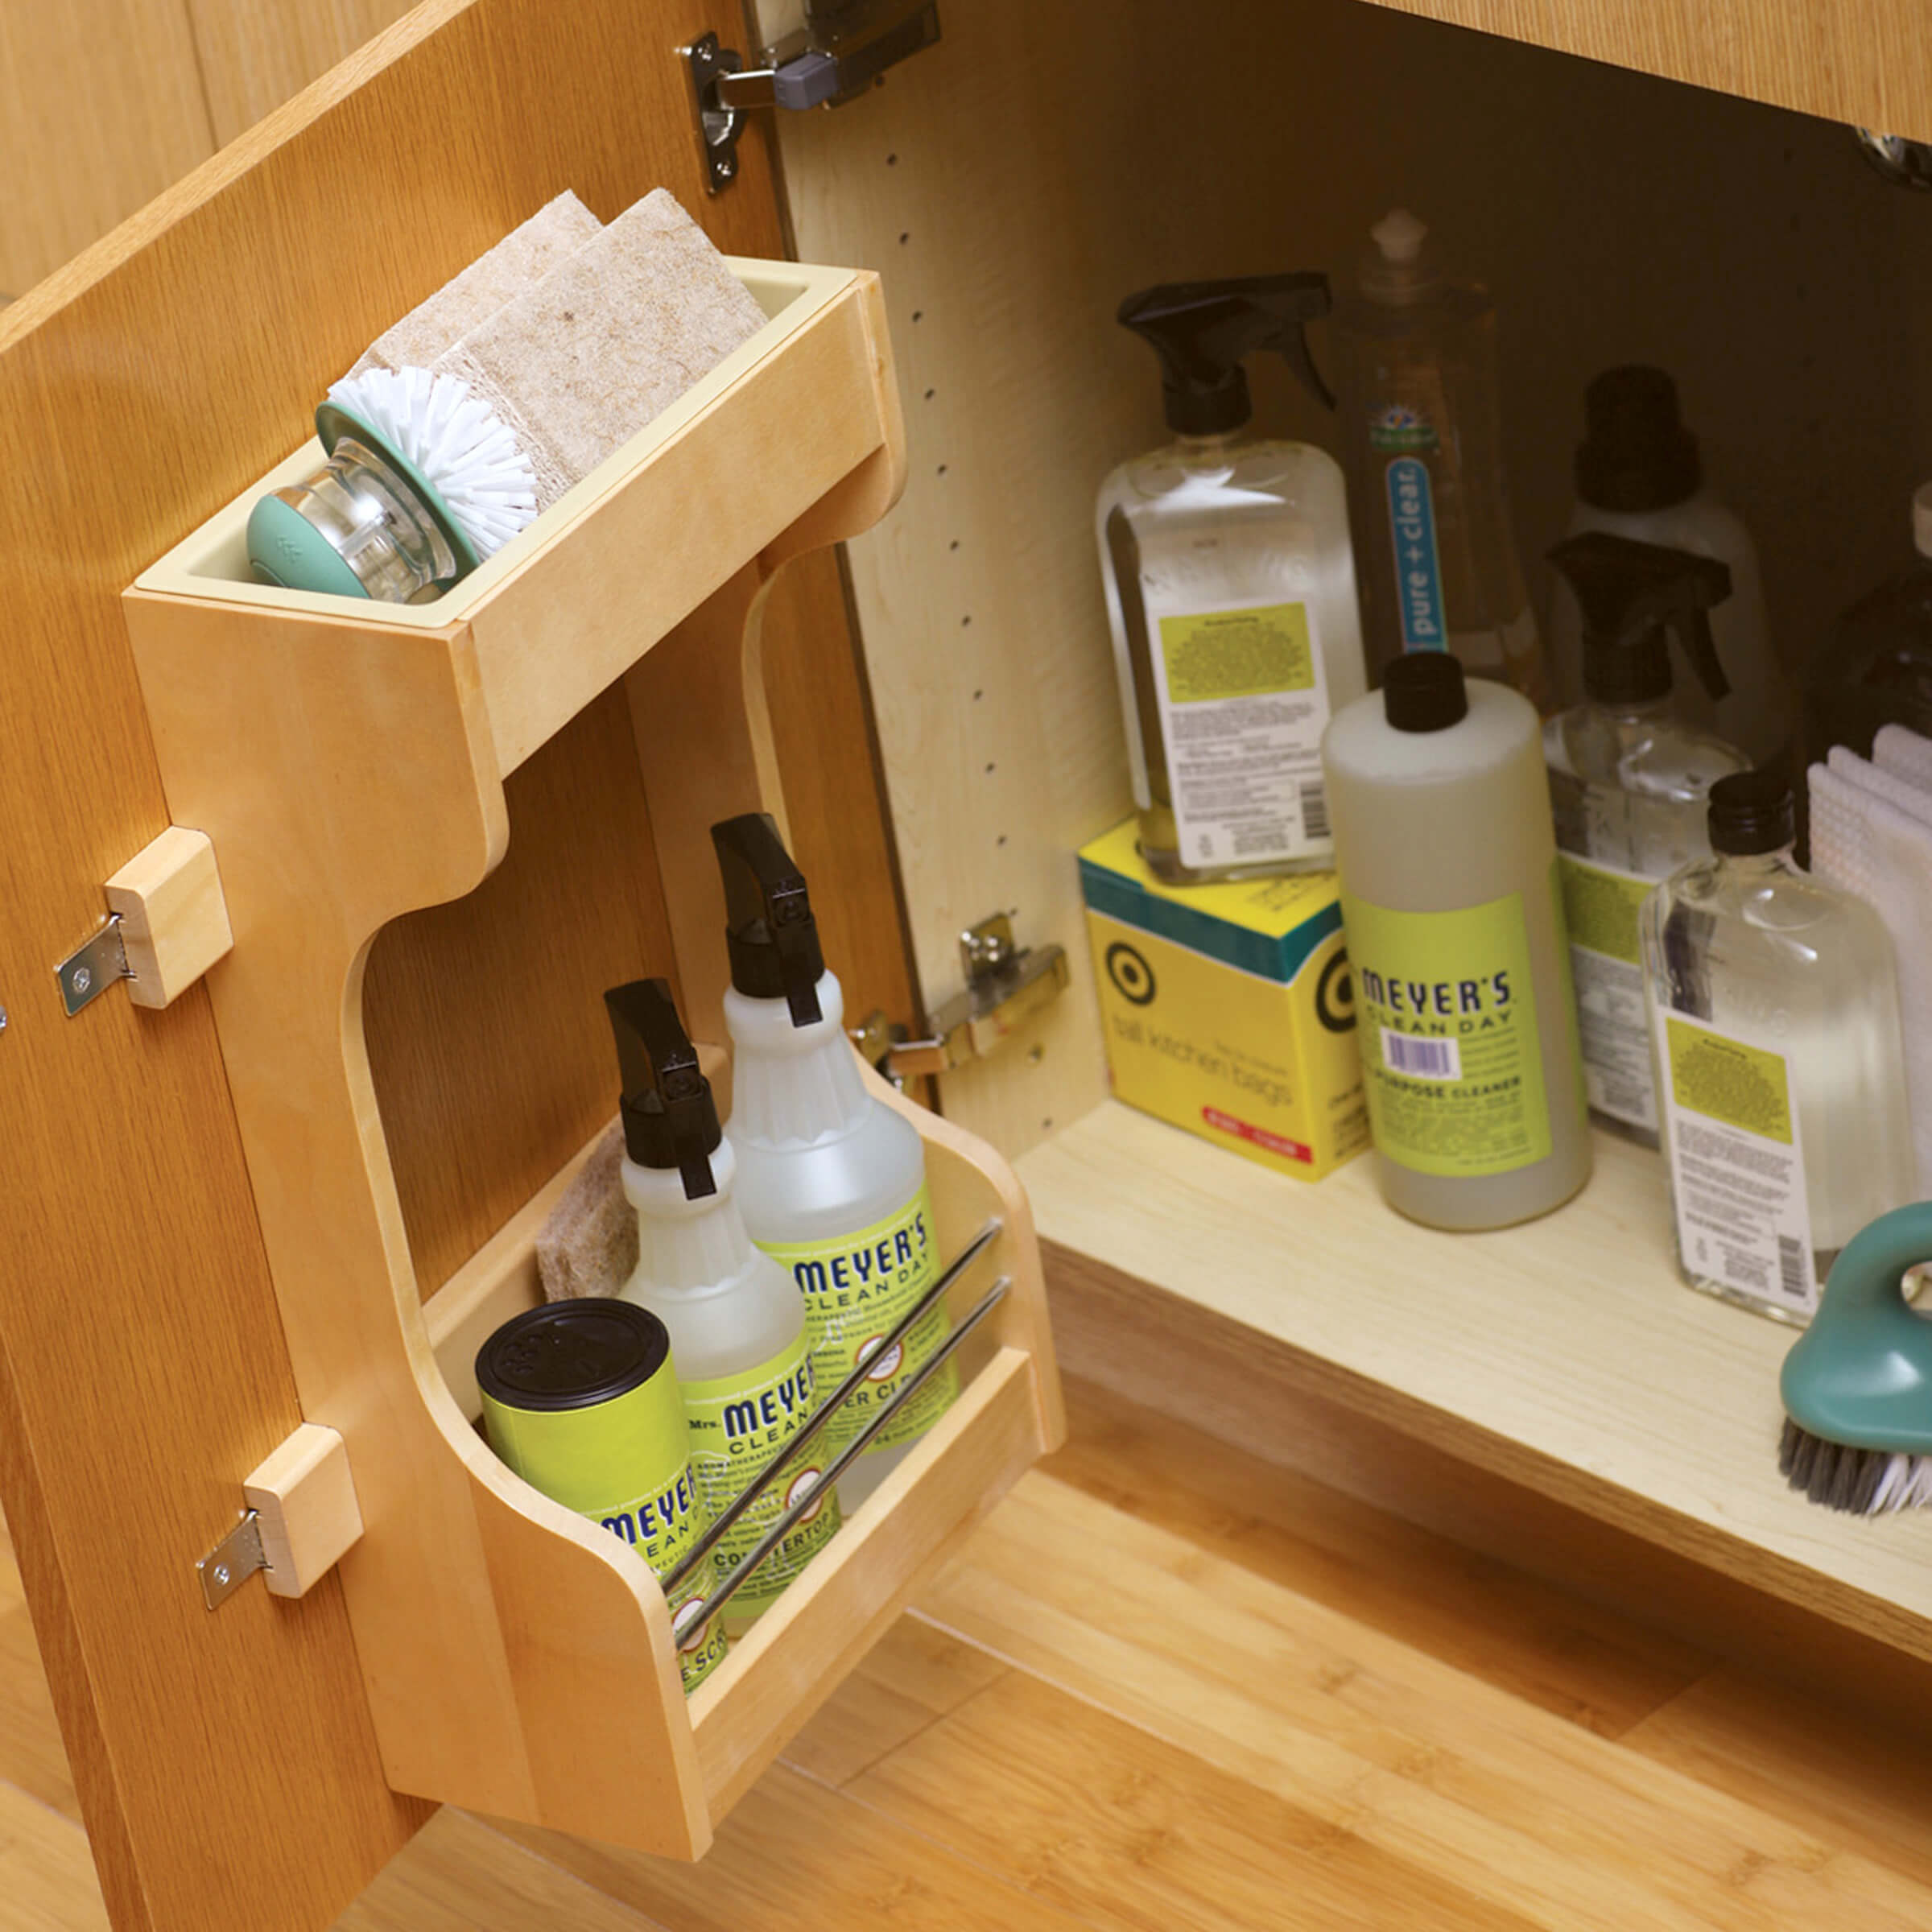 Dura Supreme’s convenient storage rack on the cabinet door organizes cleaning supplies and provides a space for you most used products to be close at hand.